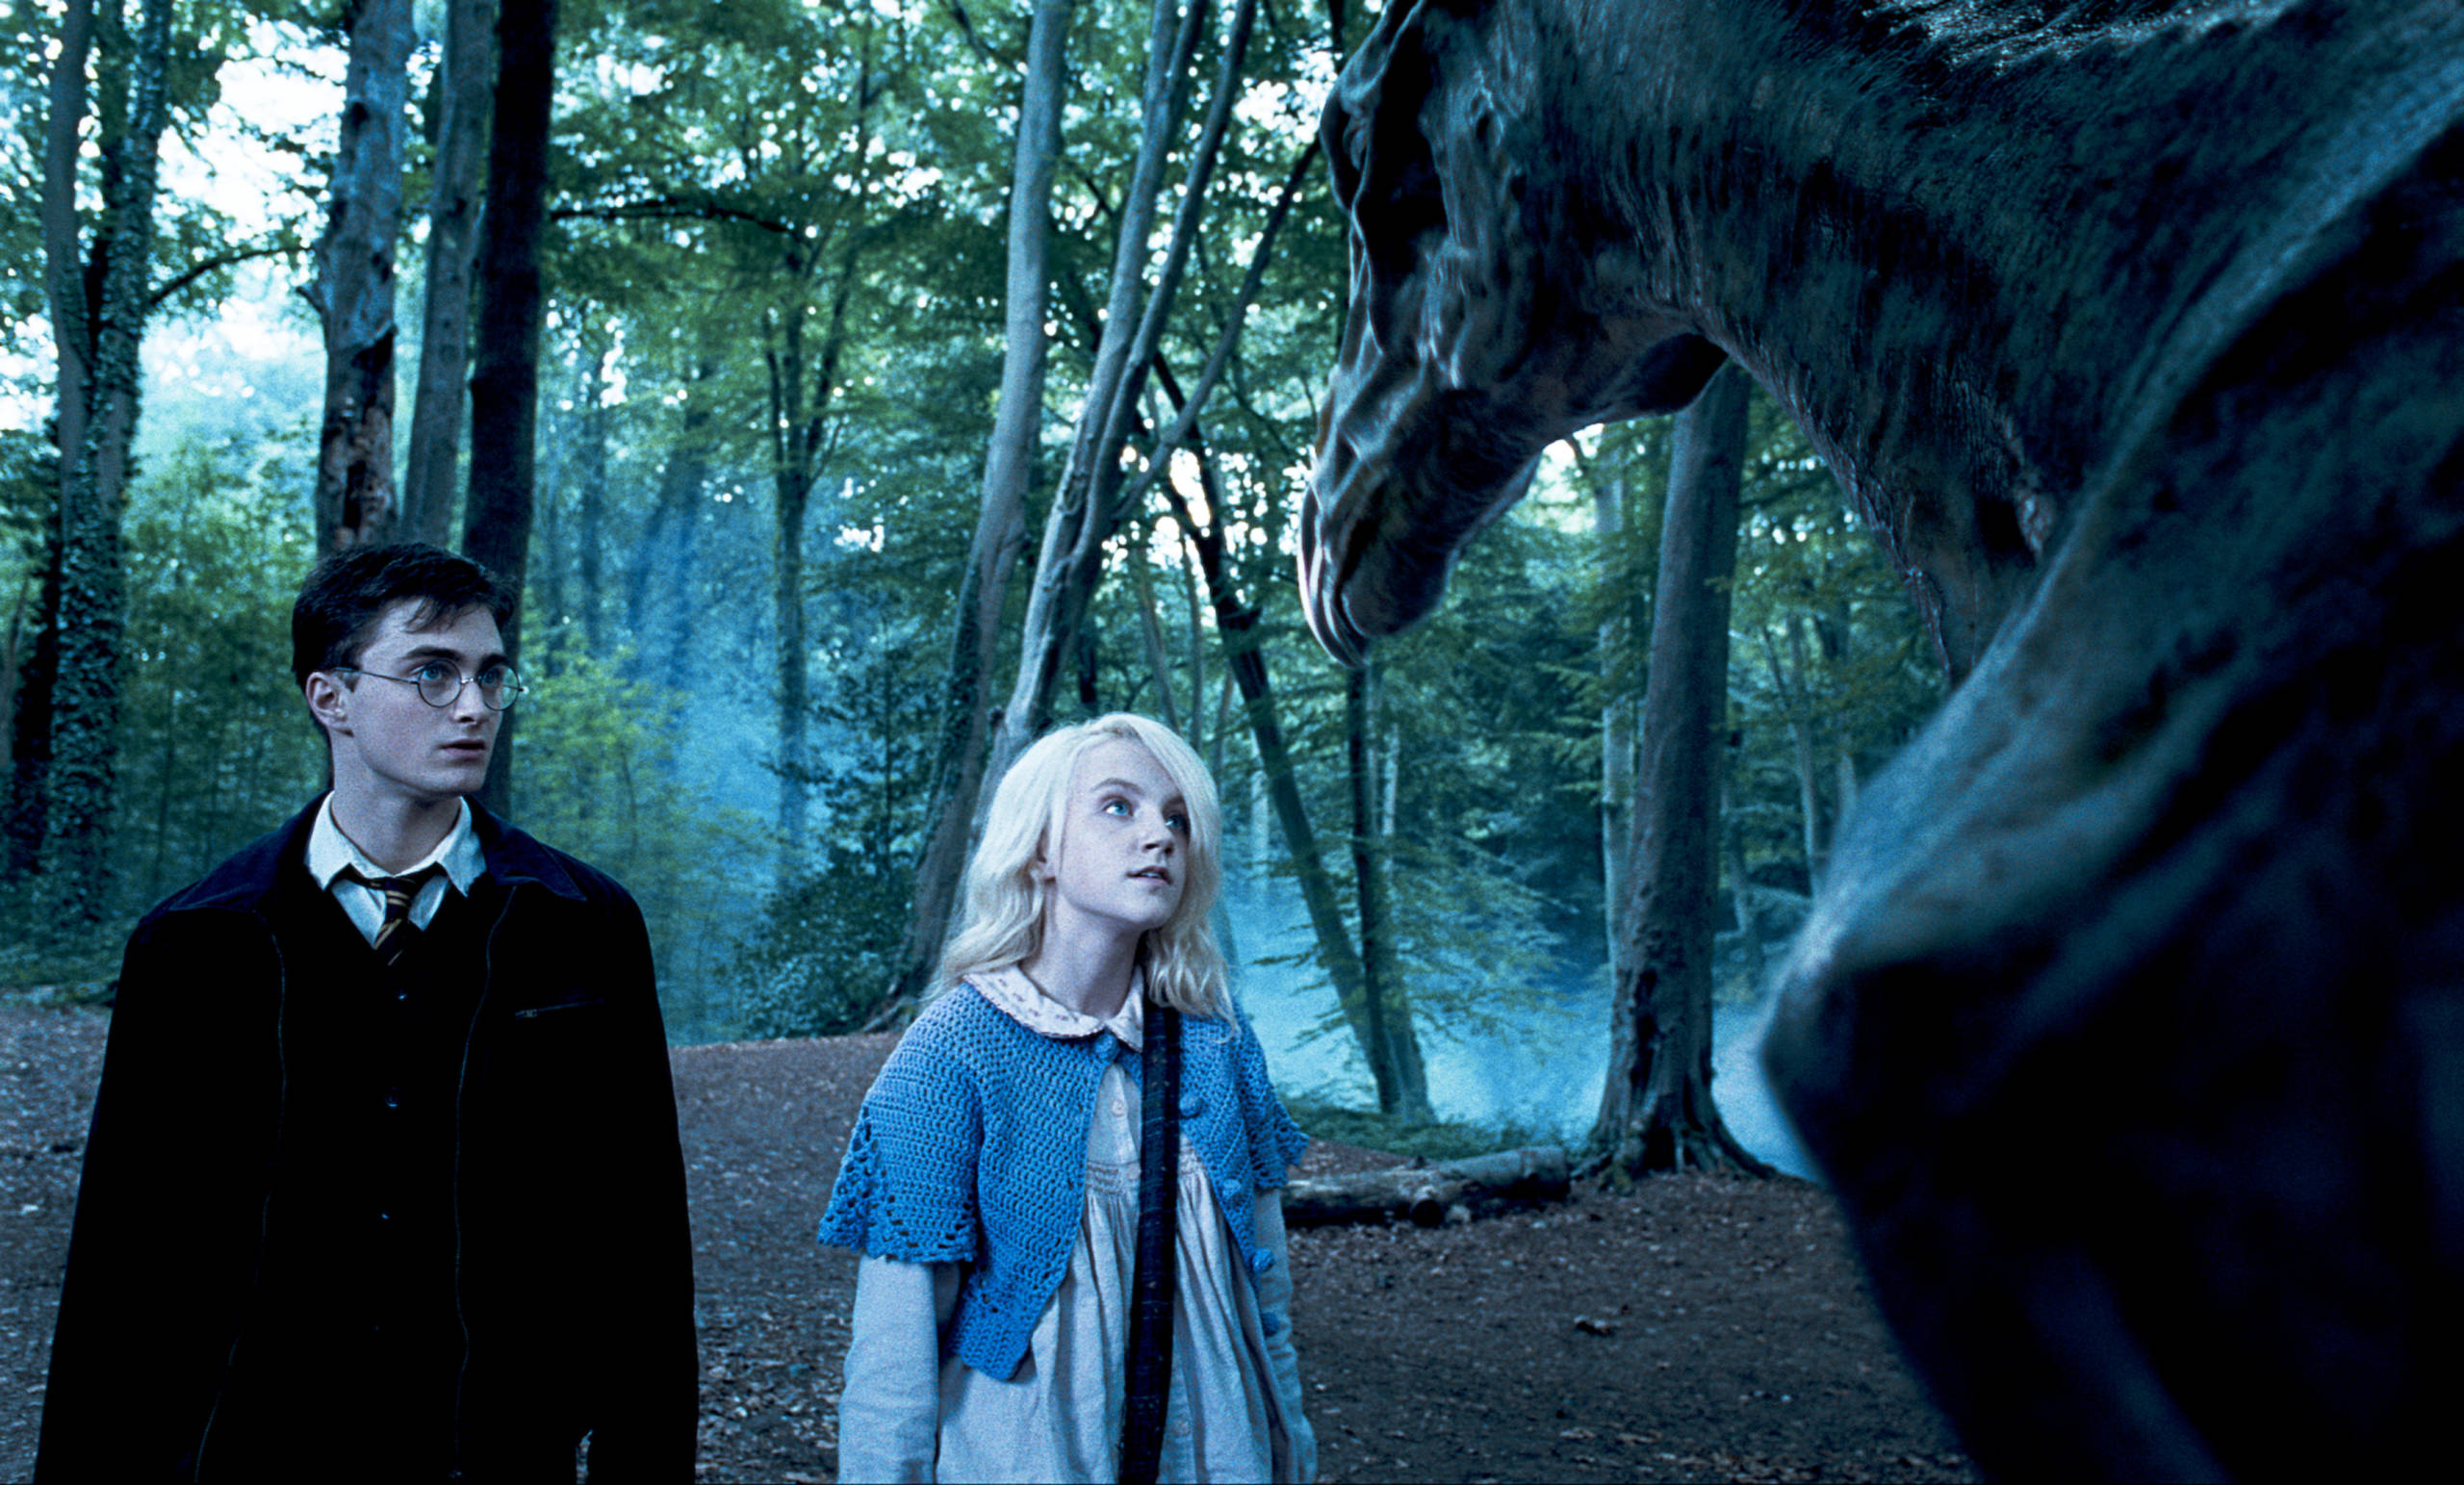 Harry and Luna look at Thestrals in the forest in a still from the Order of the Phoenix.